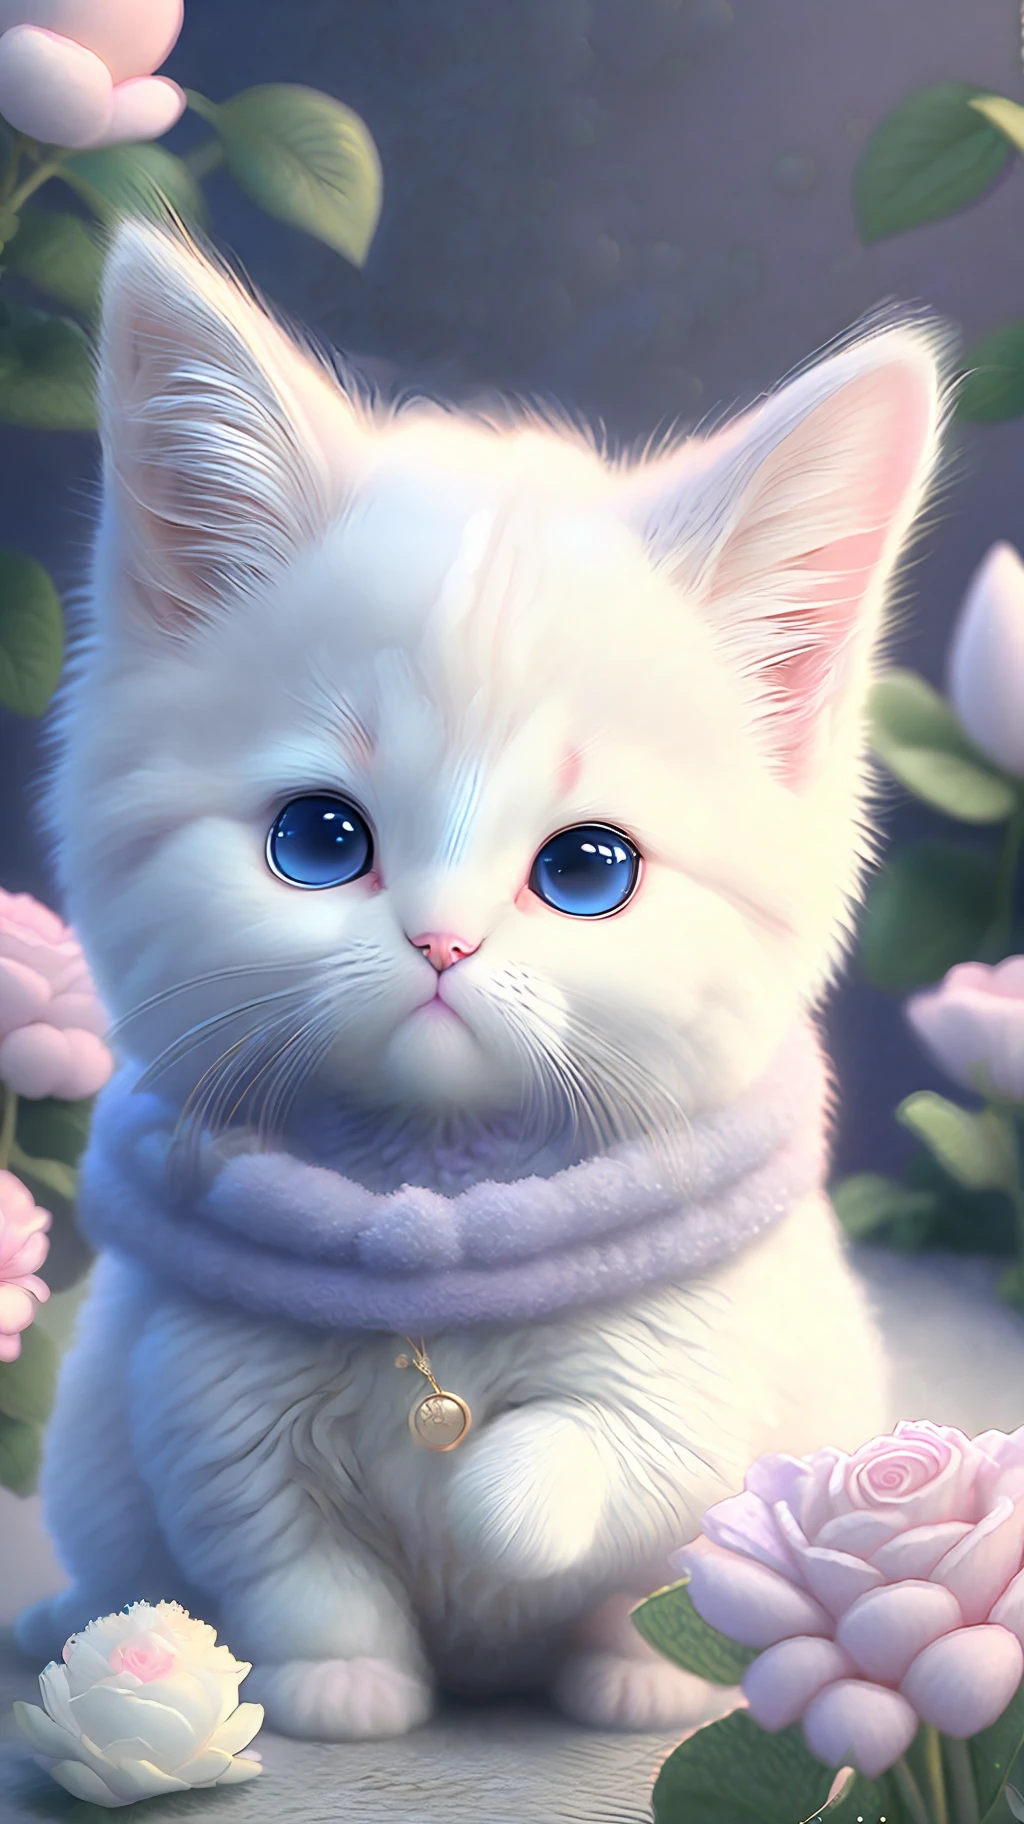 In this ultra-detailed CG art, cute kittens surrounded by ethereal roses, laughter, best quality, high resolution, intricate details, fantasy, cute animals, purple, funny, open mouth!! Laugh!!!